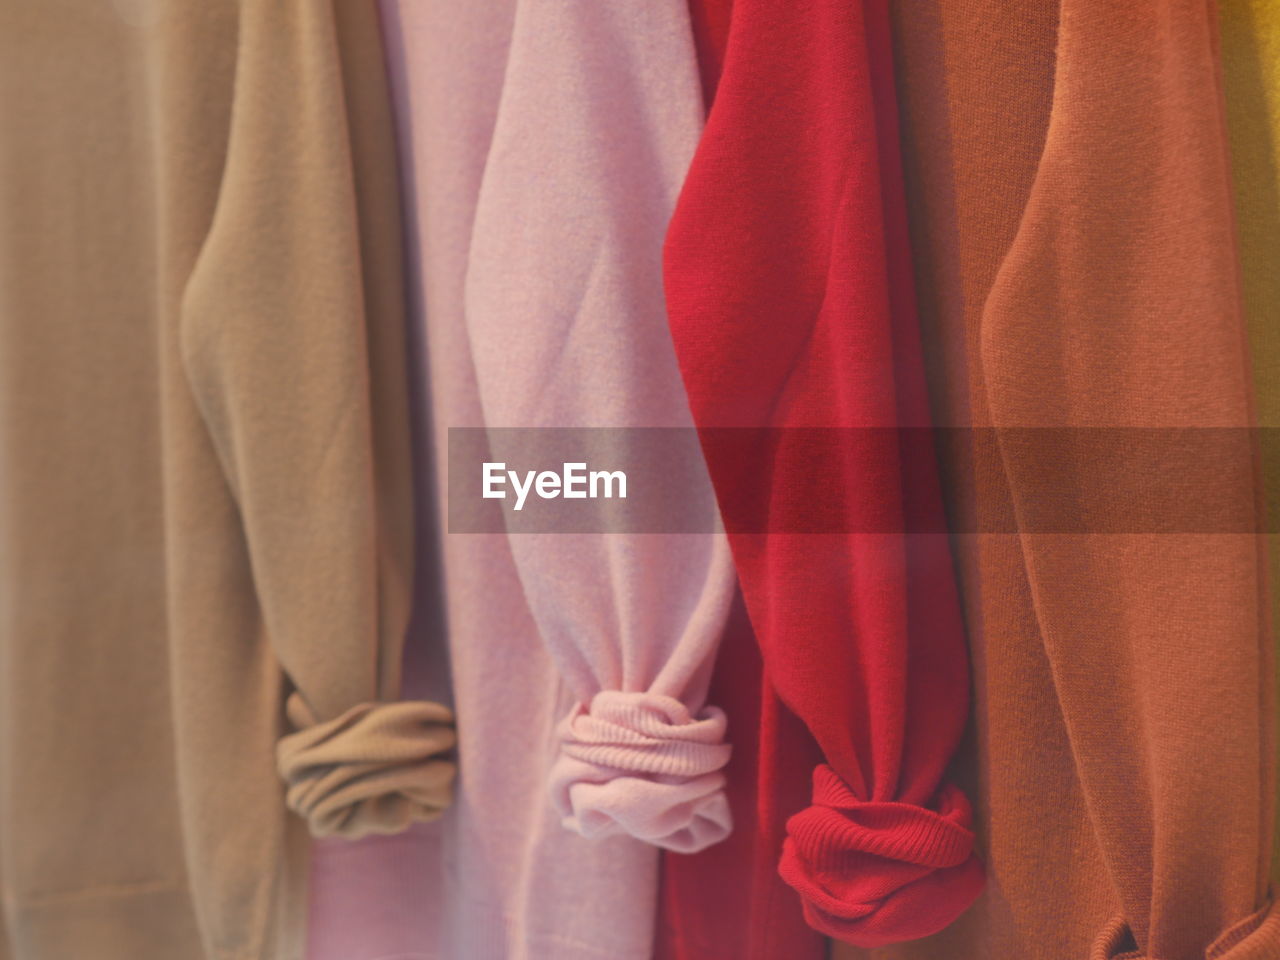 Close-up of clothes hanging in store